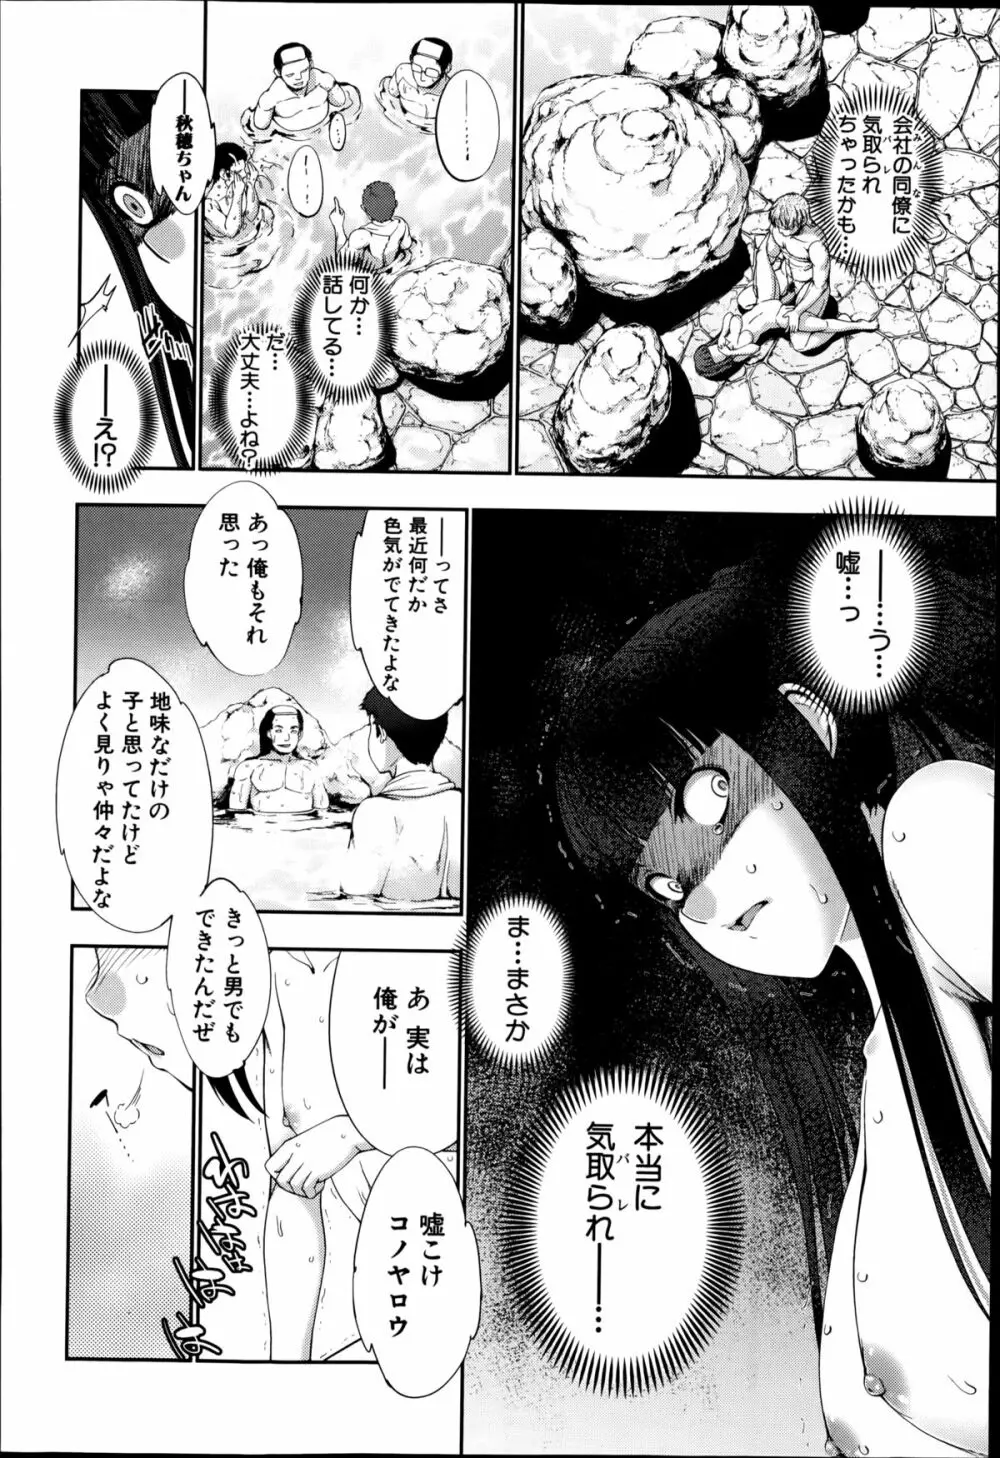 STG 第1-4章 Page.78